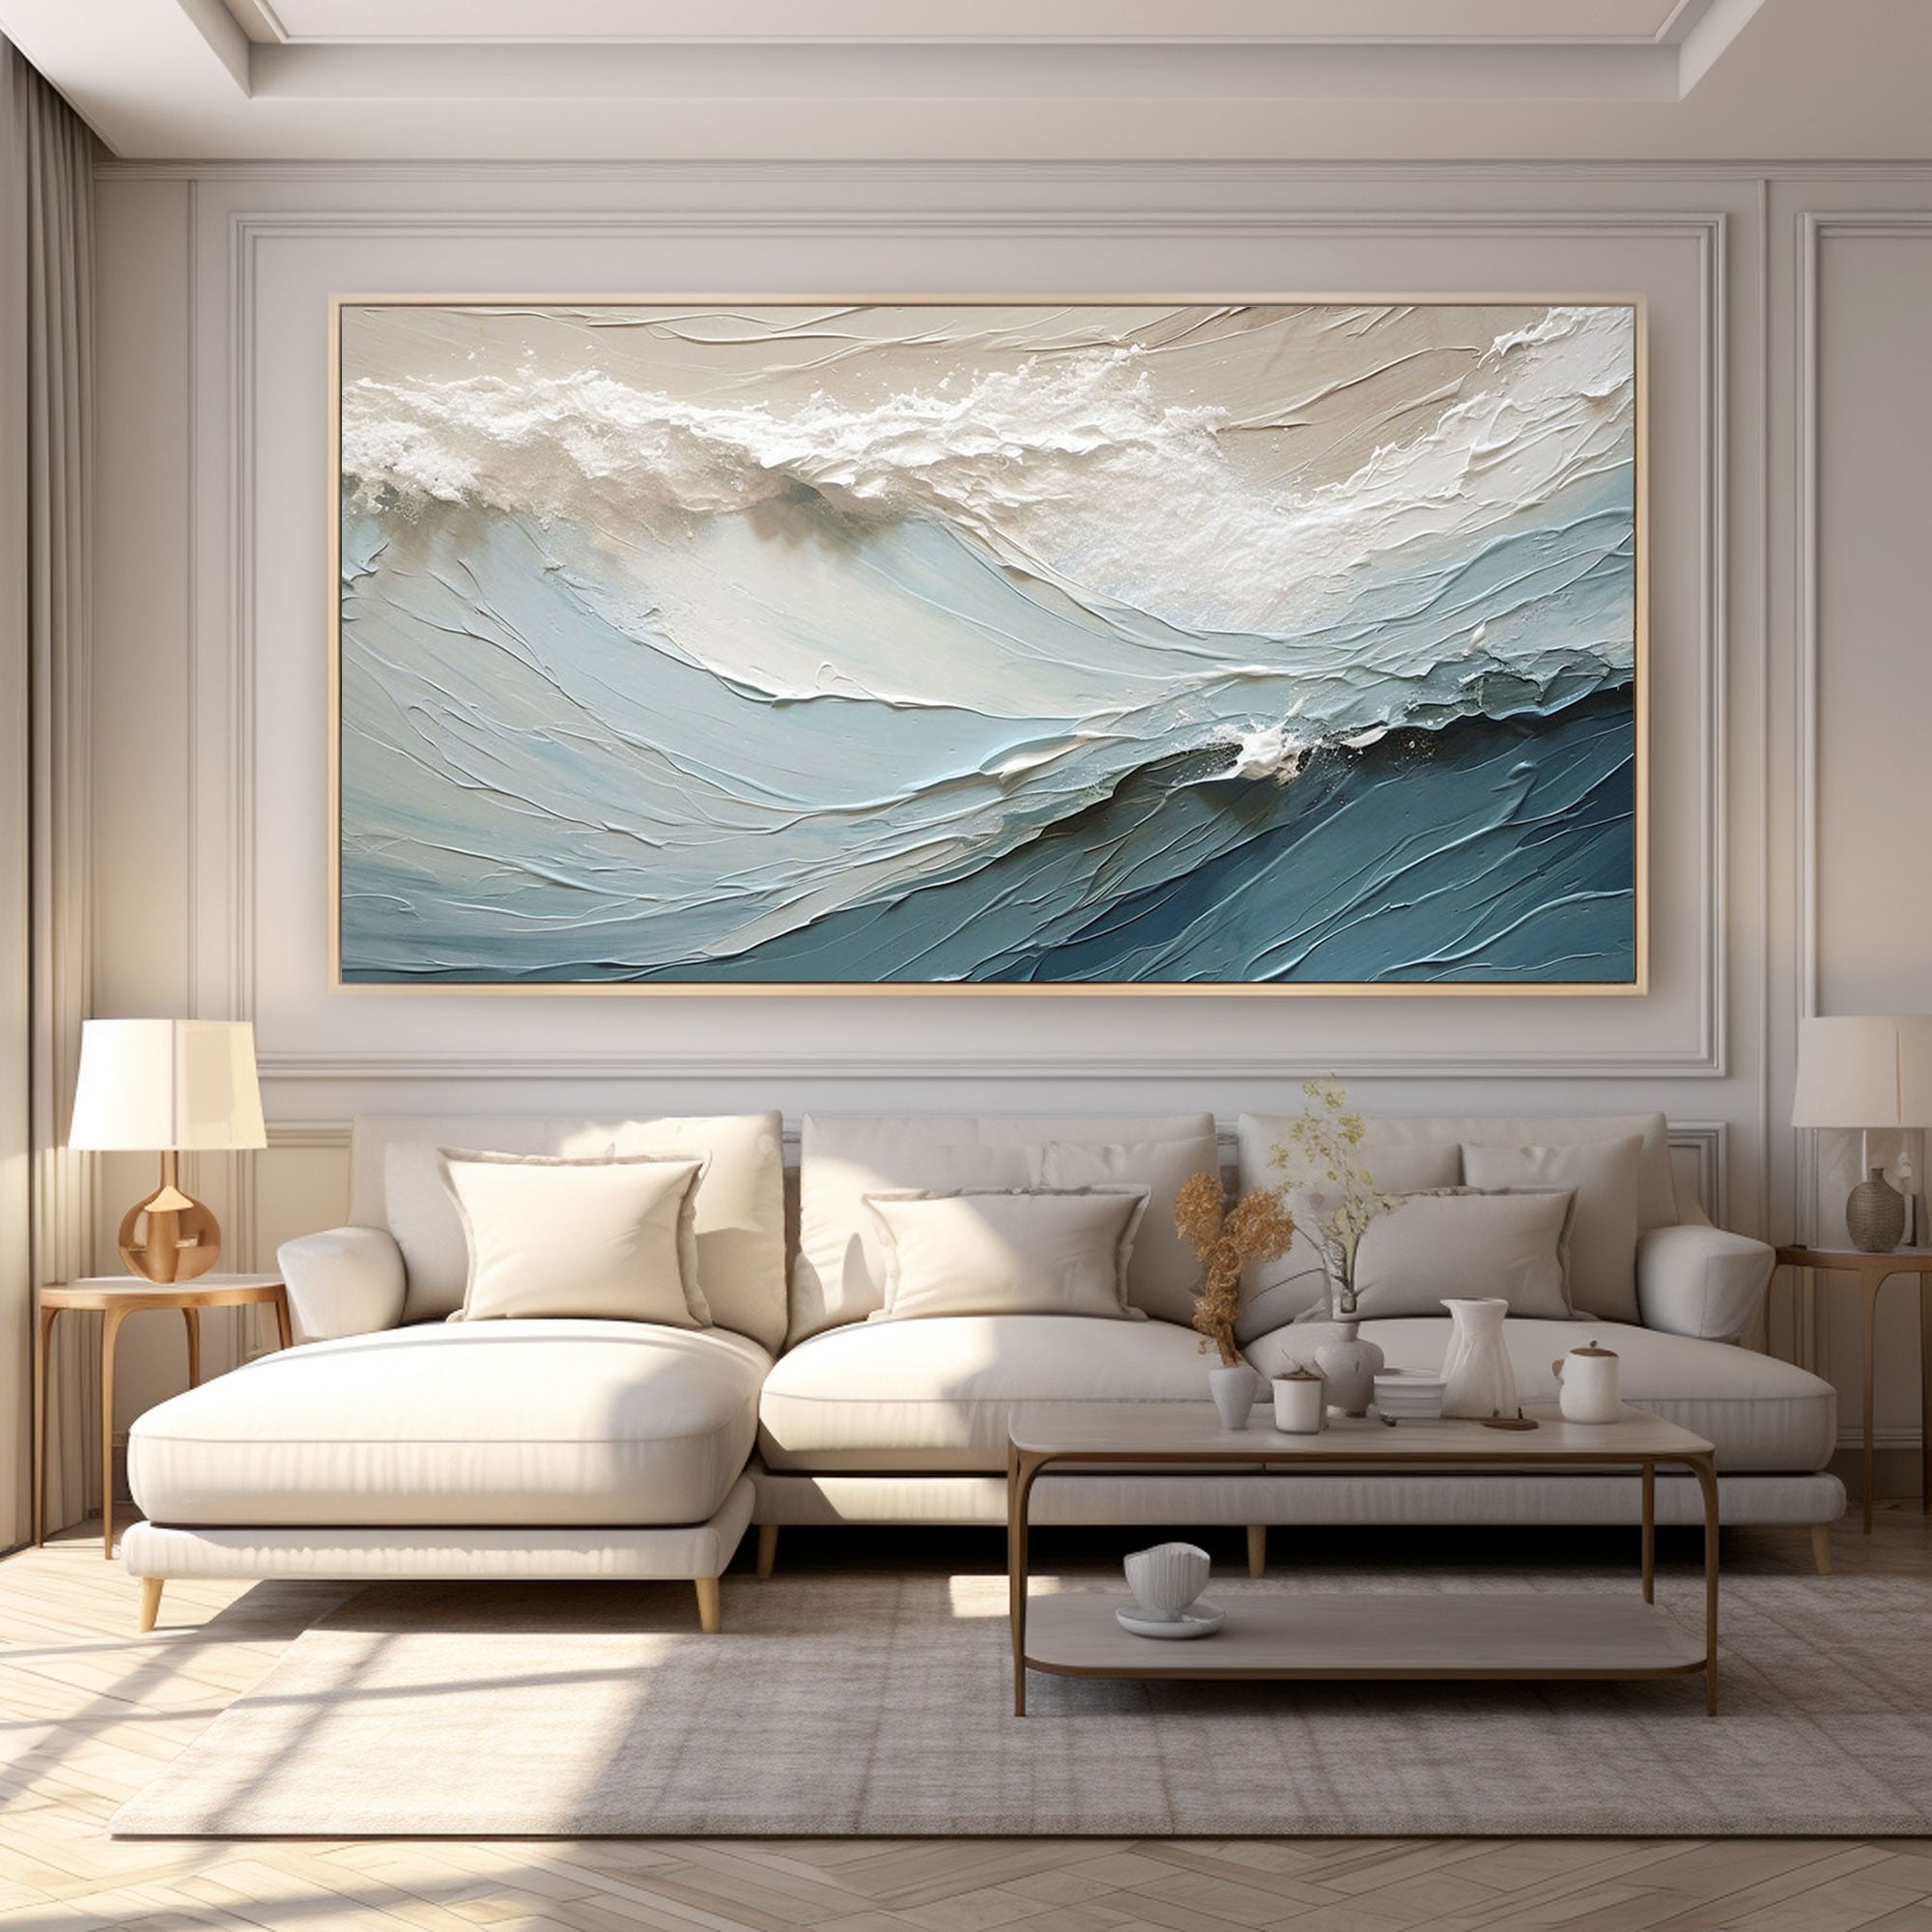 3D Textured Blue Abstract Art Painting "Surge"